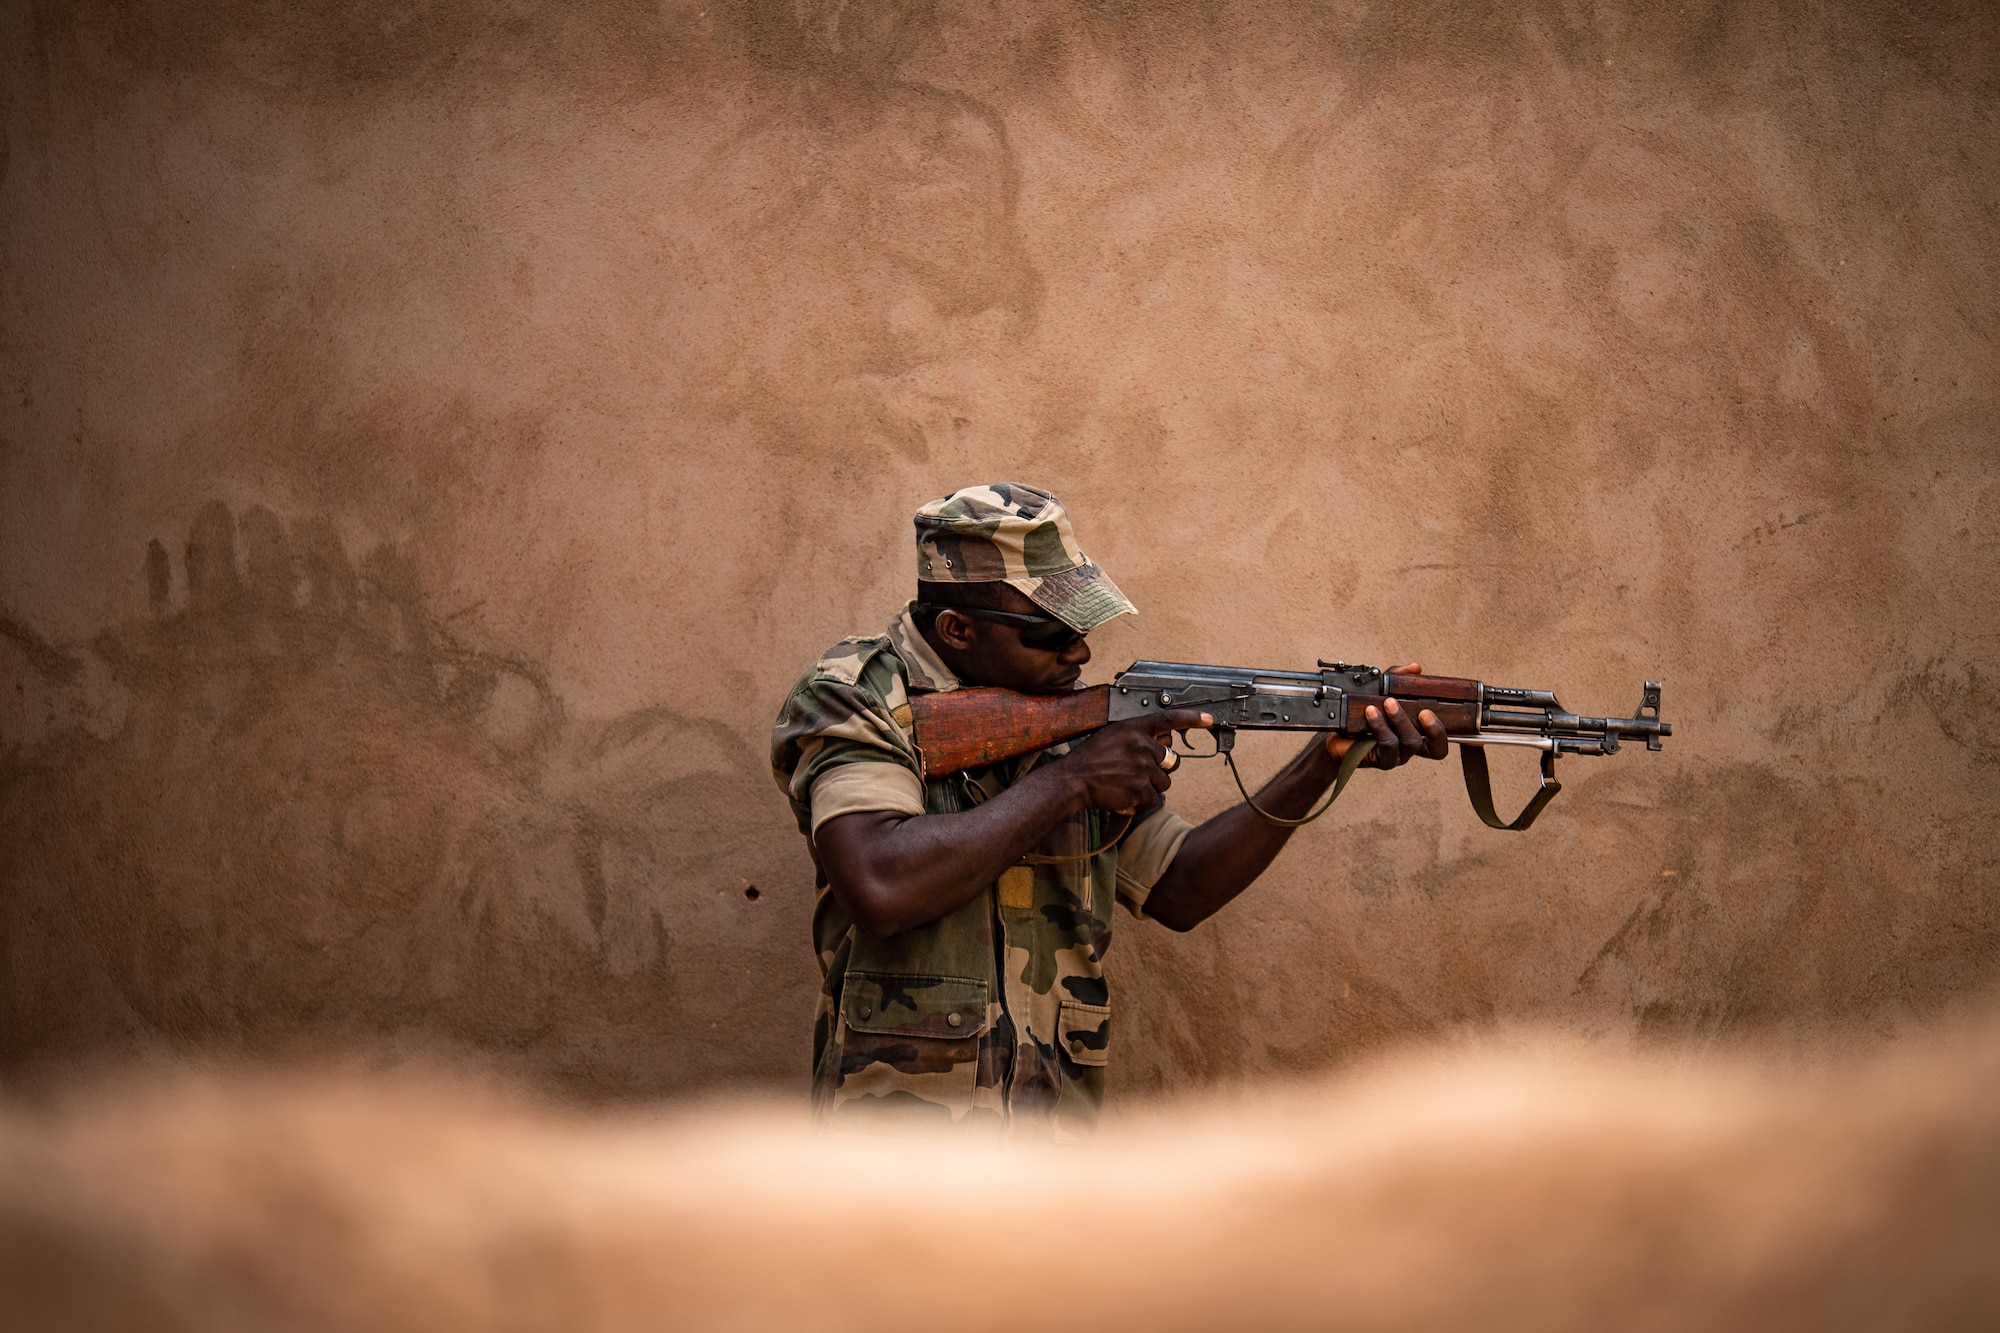 A Niger Armed Forces (French language: Forces Armées Nigeriennes) member clears a room during a training exercise with the 409th Expeditionary Security Forces Squadron air advisors at the FAN compound on Nigerien Air Base 201 in Agadez, Niger, July 10, 2019. The air advisors taught them how to efficiently clear a building while keeping their comrades safe. (U.S. Air Force photo by Staff Sgt. Devin Boyer)